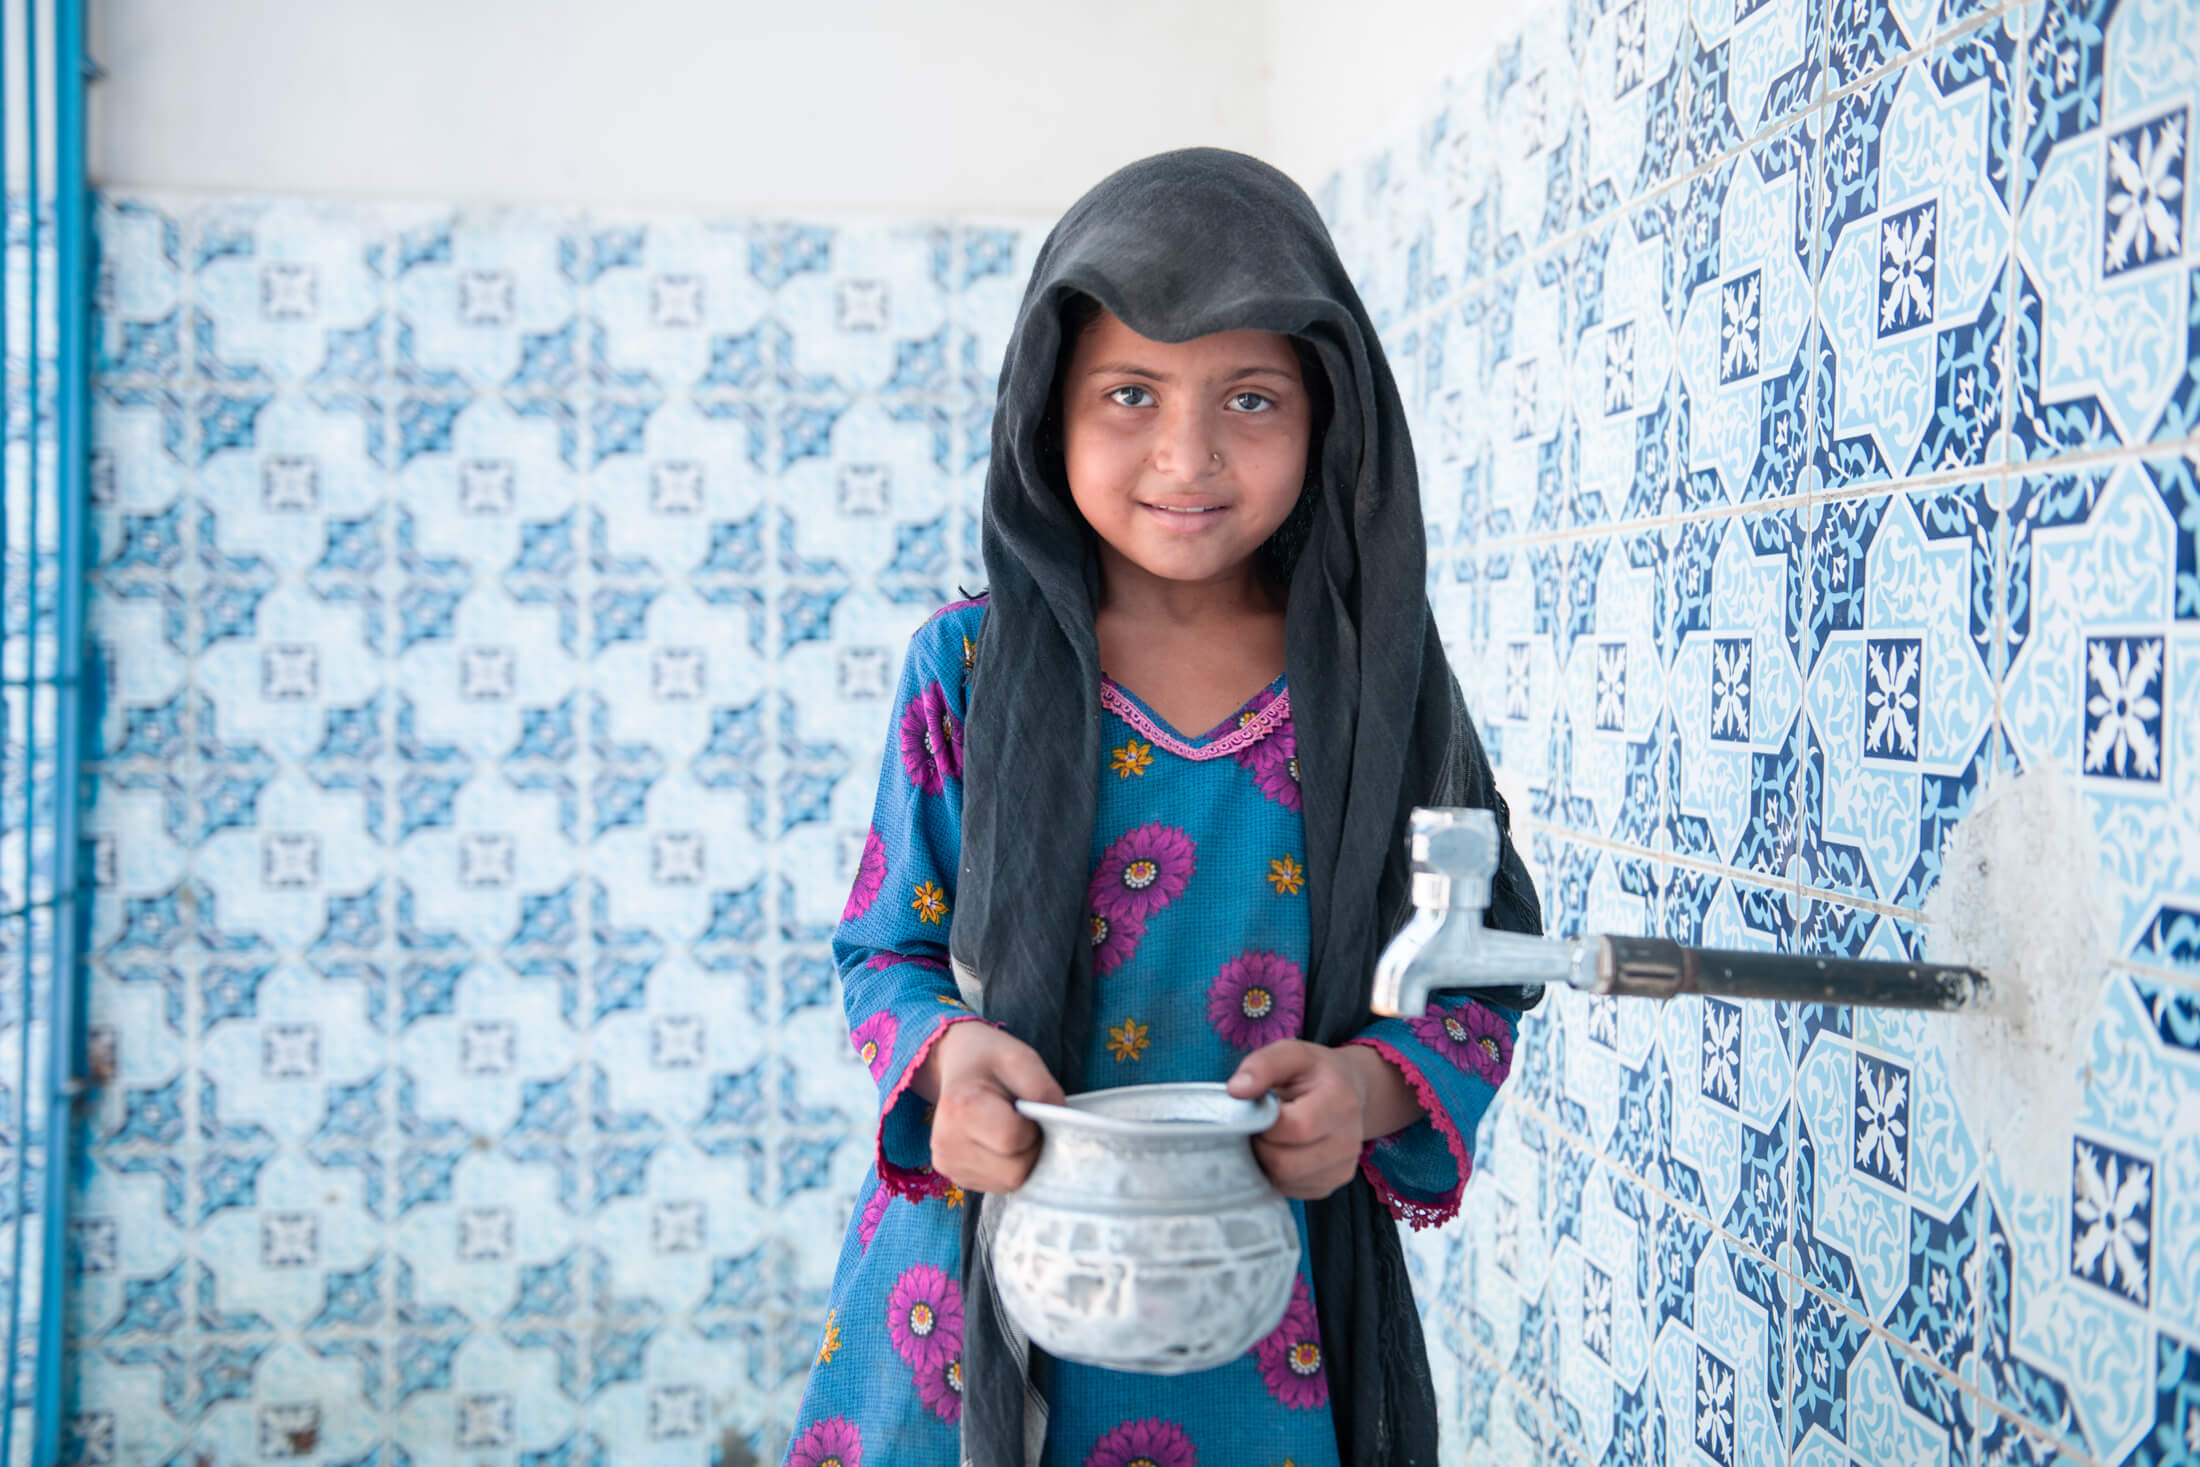 8-year-old Muskaan fills her water jug with clean water from the water supply system in Rindo Khan Laghari village.